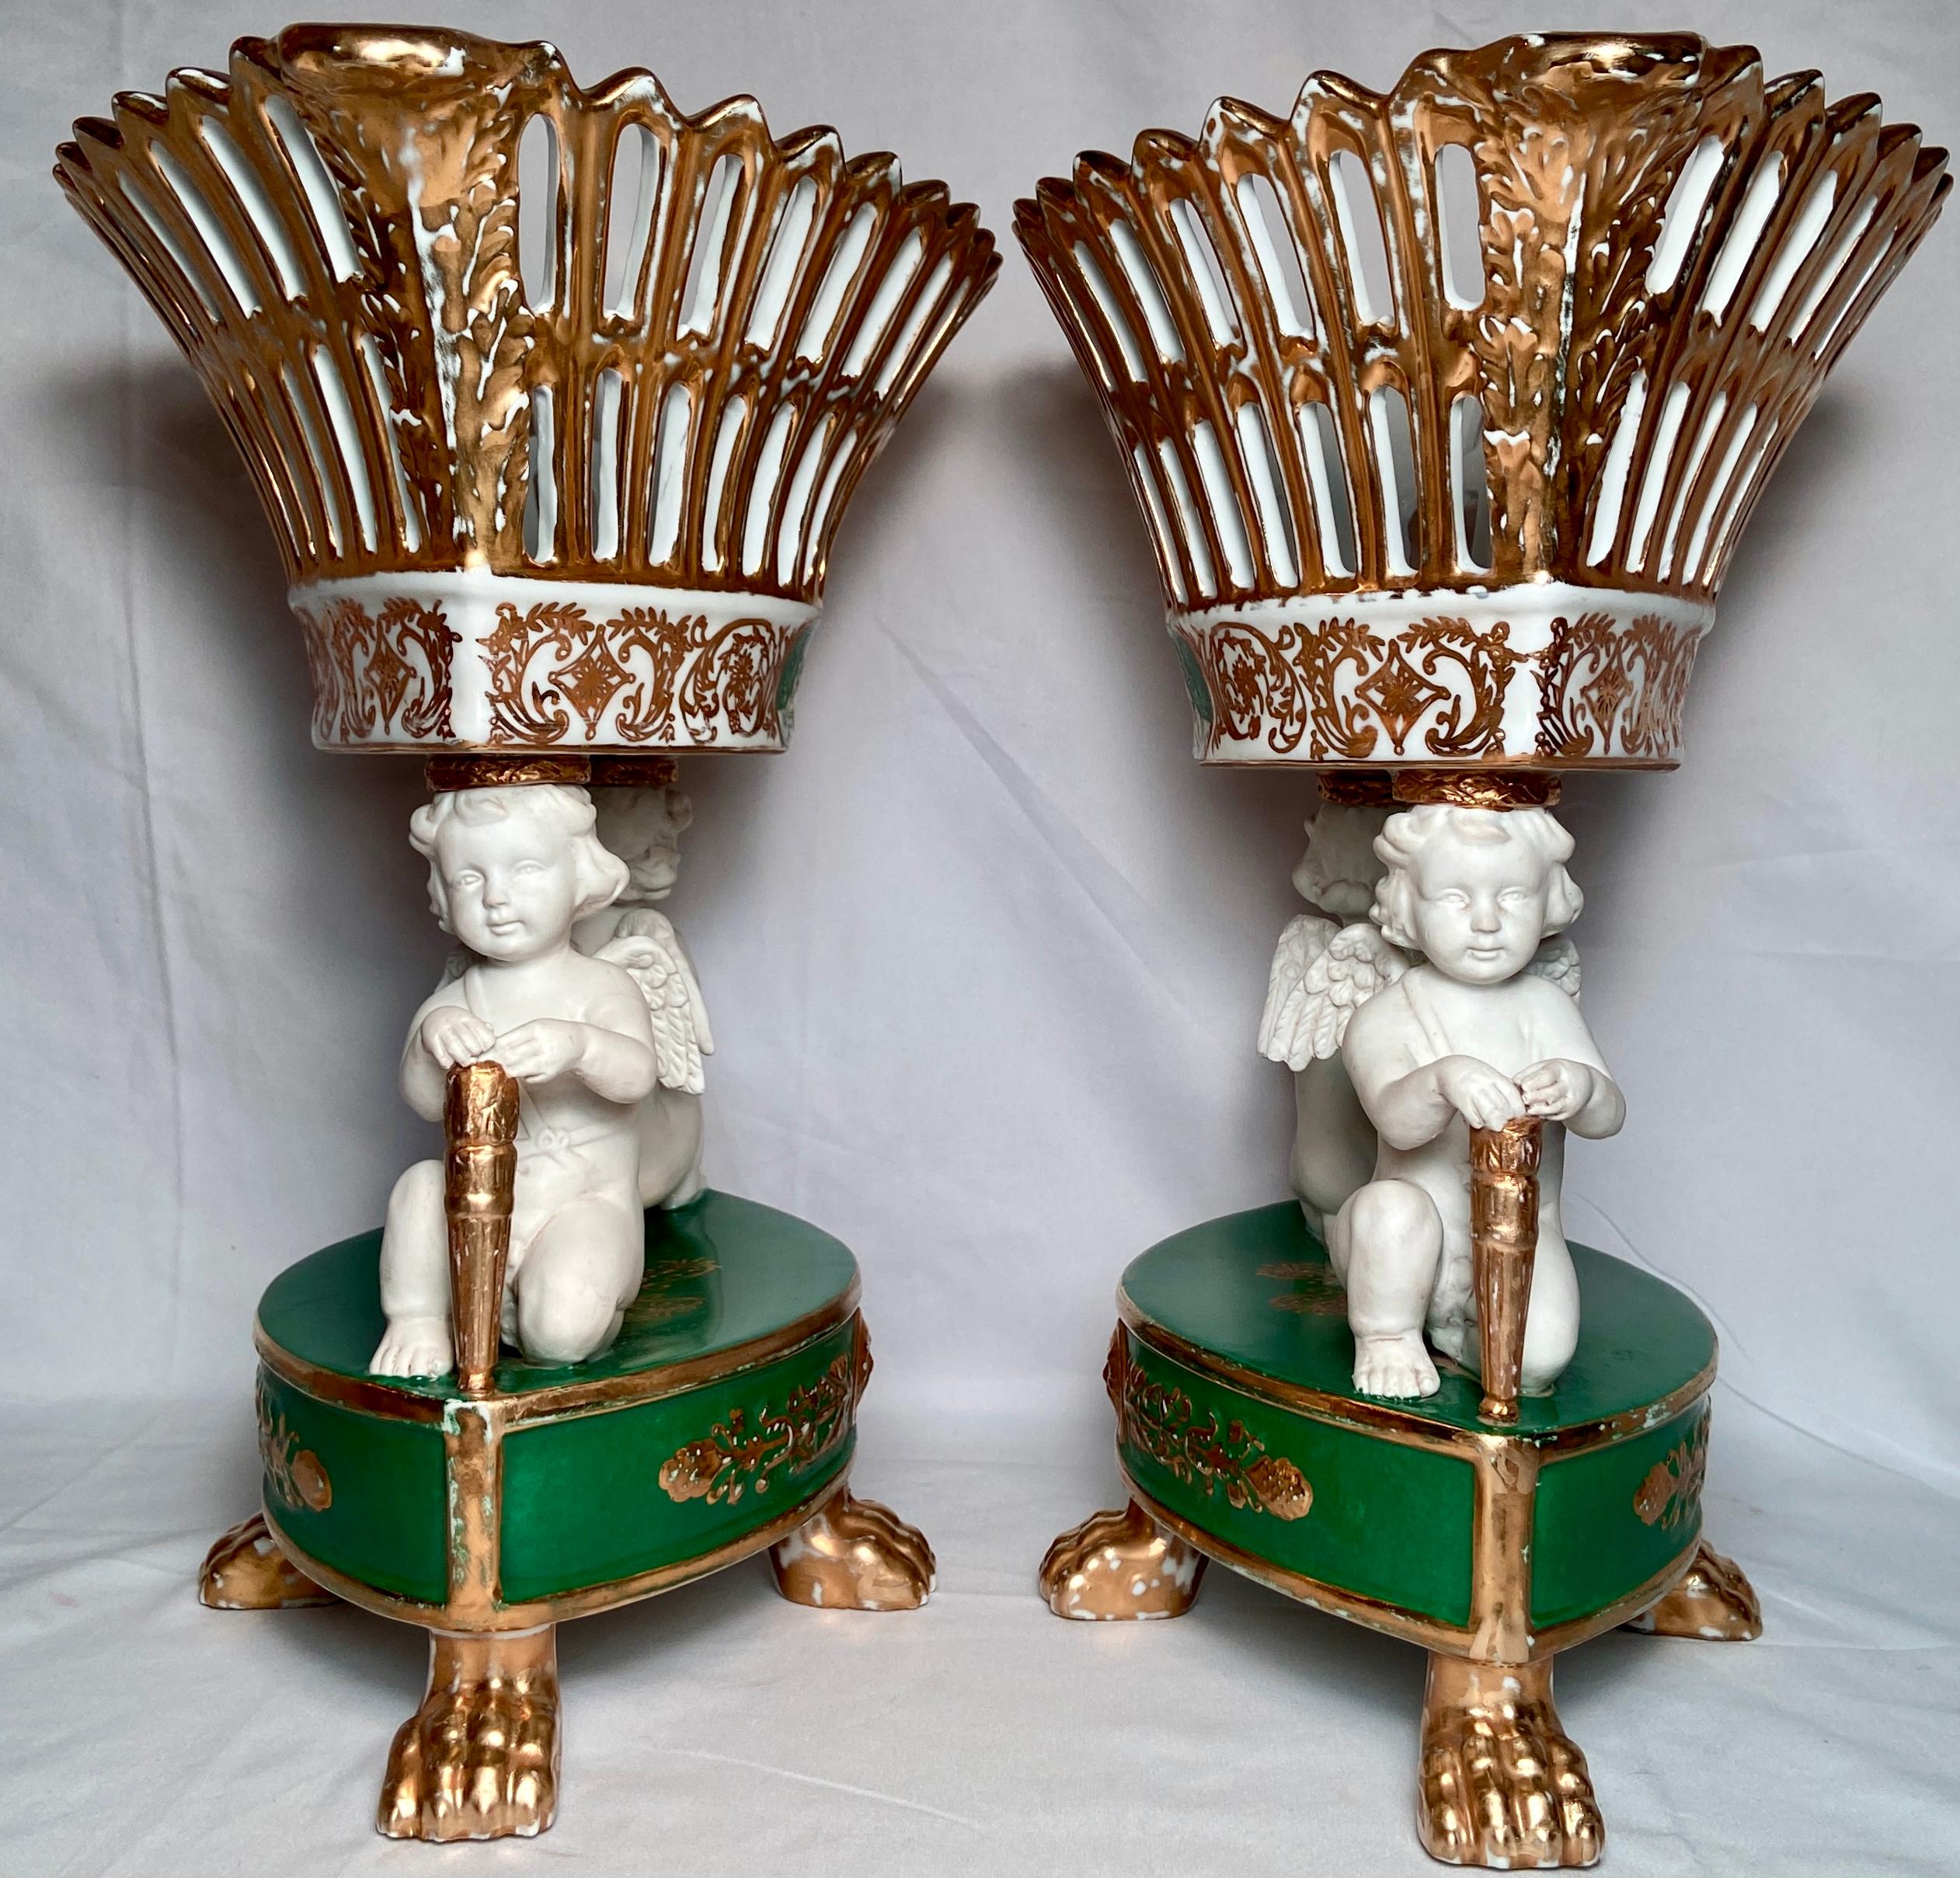 Pair Antique French Sevres Green, White & Gold Porcelain Urns, Circa 1880.